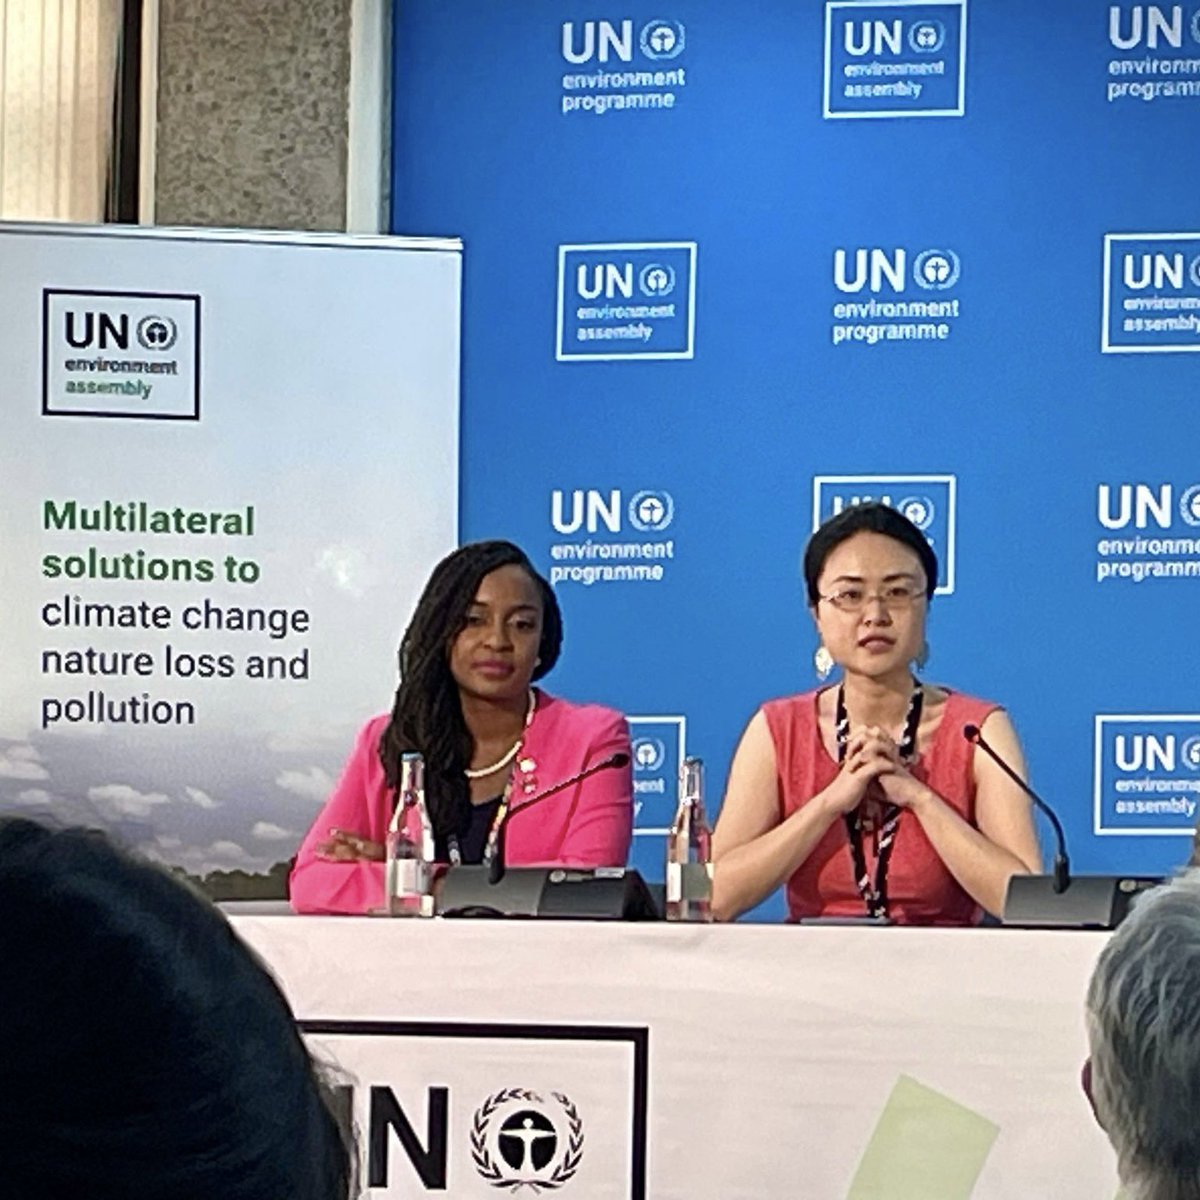 Science Unit’s Dr Melissa Wang (right) takes part in a panel discussion during the United Nations Environment Assembly UNEA 6 meeting in Nairobi